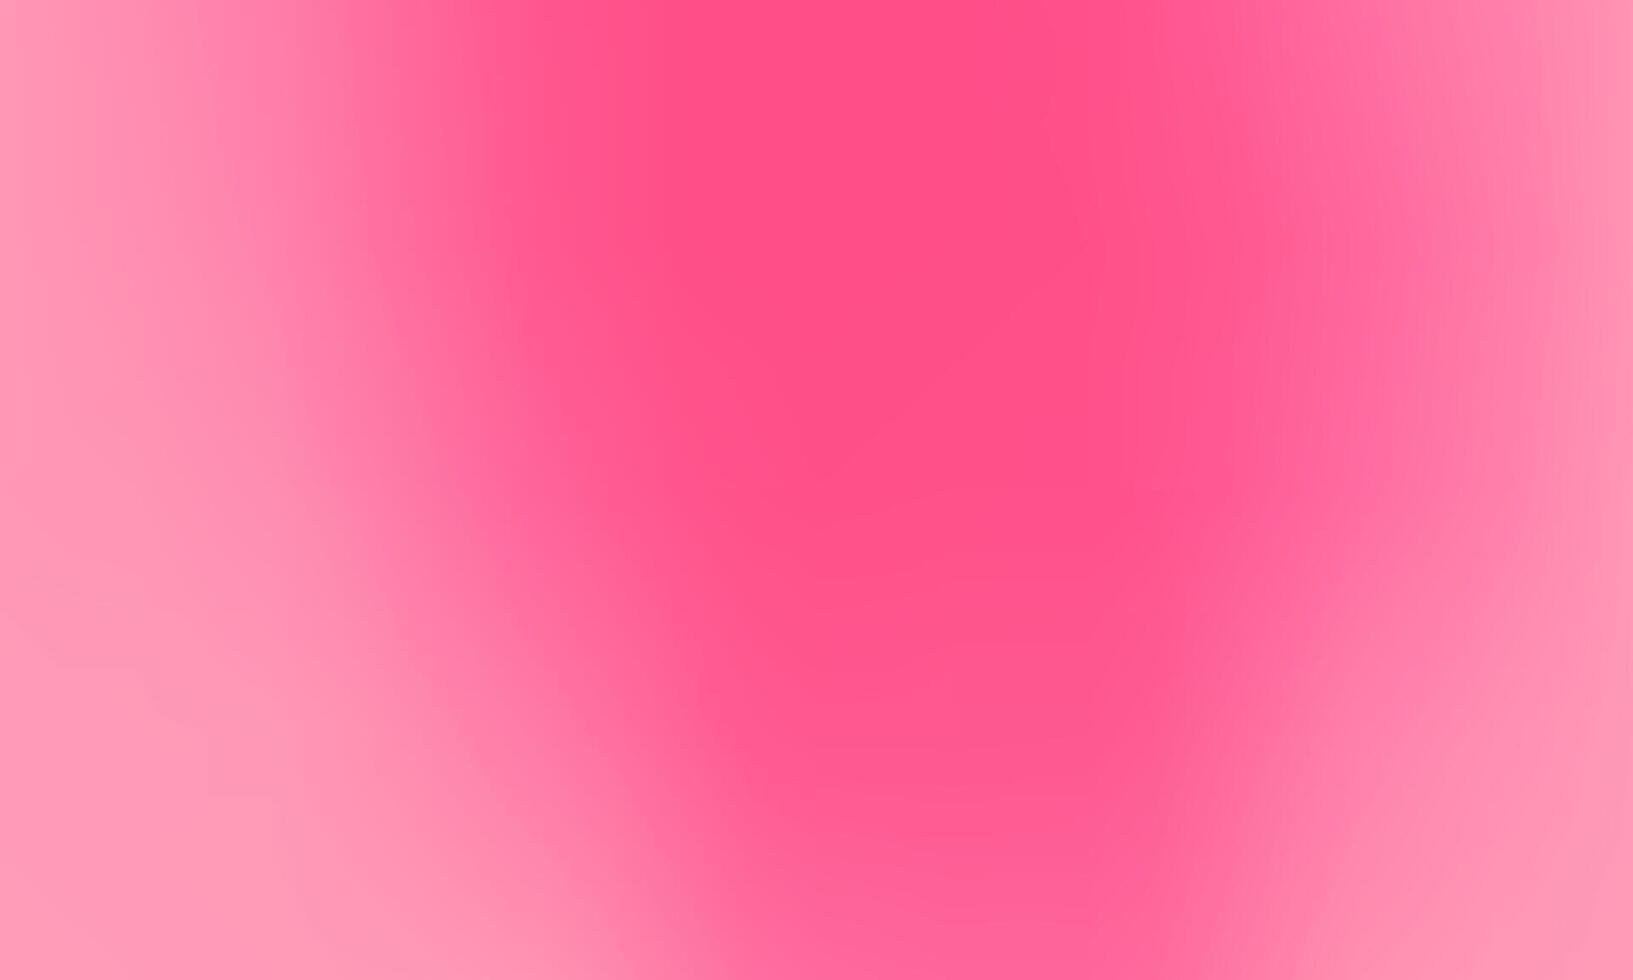 Pink Color Gradient Blurred Background for Graphic Designers vector